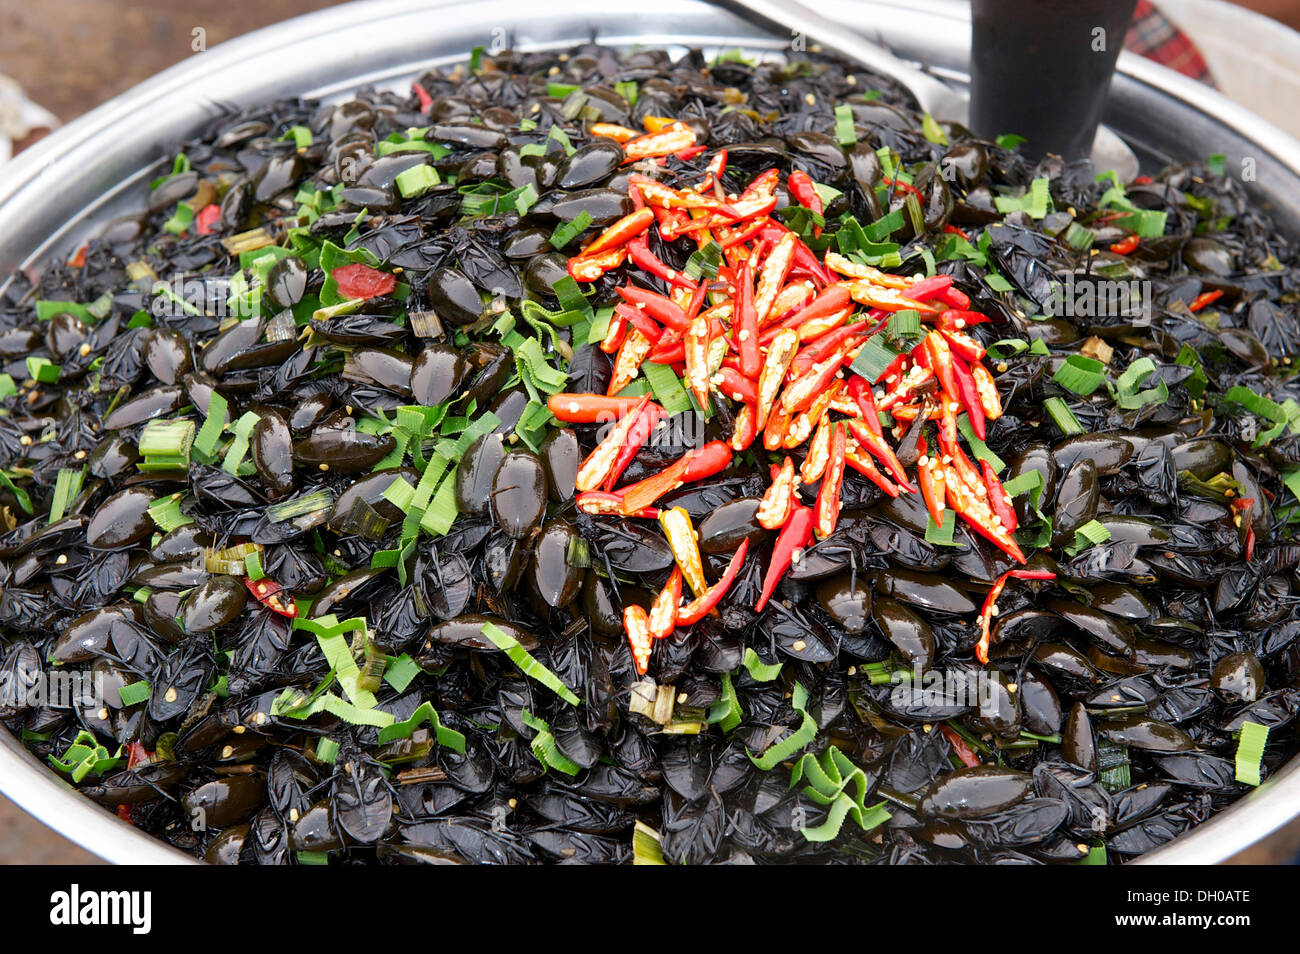 Boiled water beetles at a market, Siem Reap, Siem Reap, Siem Reap Province, Cambodia Stock Photo